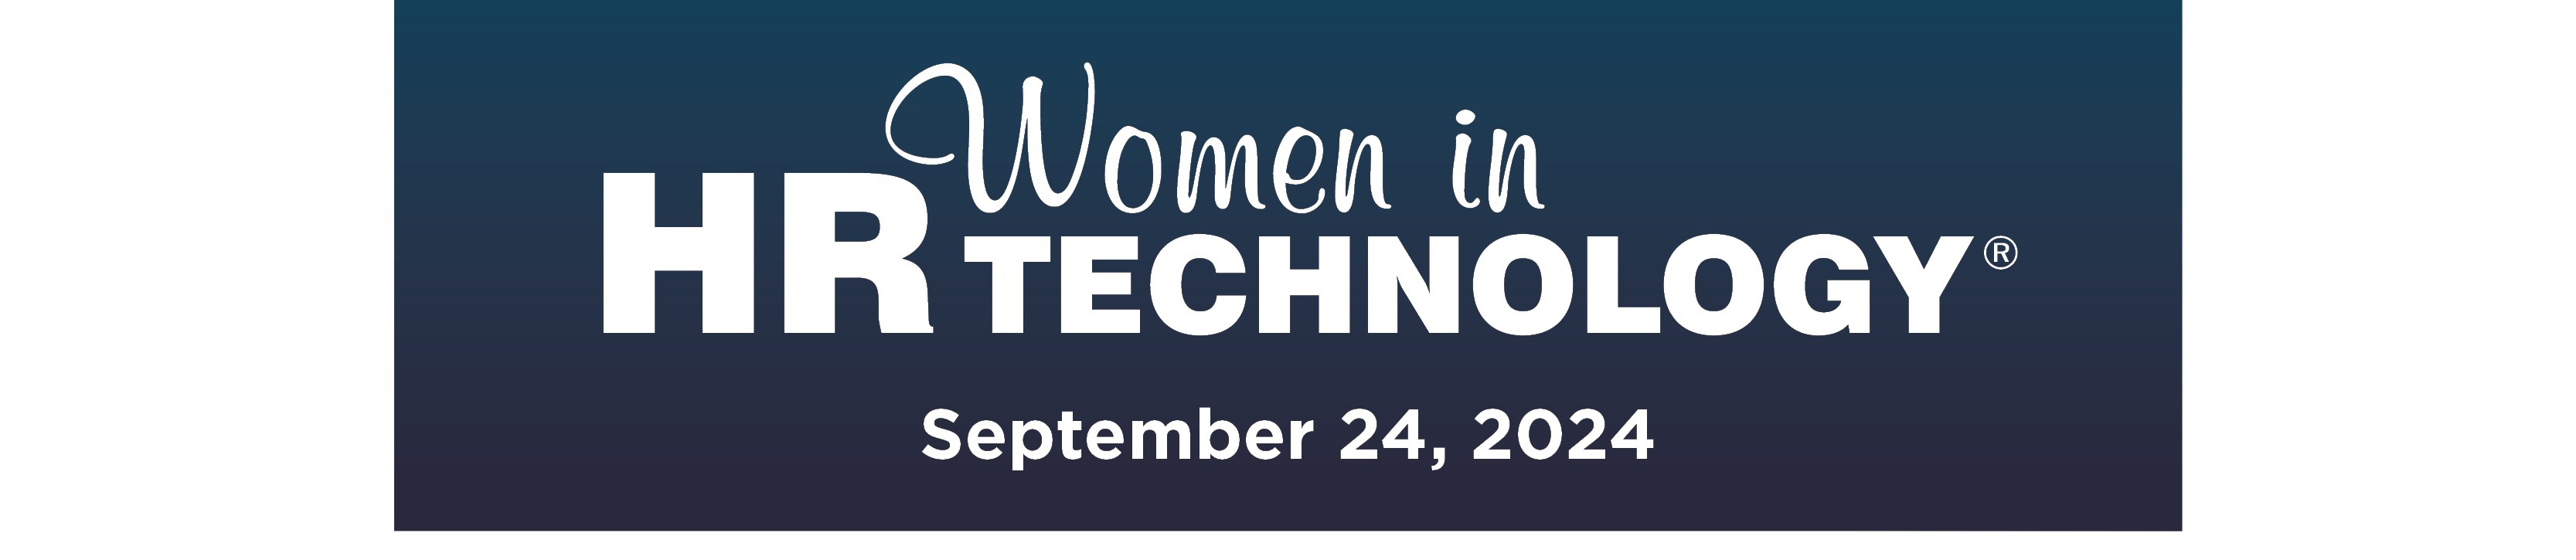 Women in HR Technology -  included in your Premium Pass!